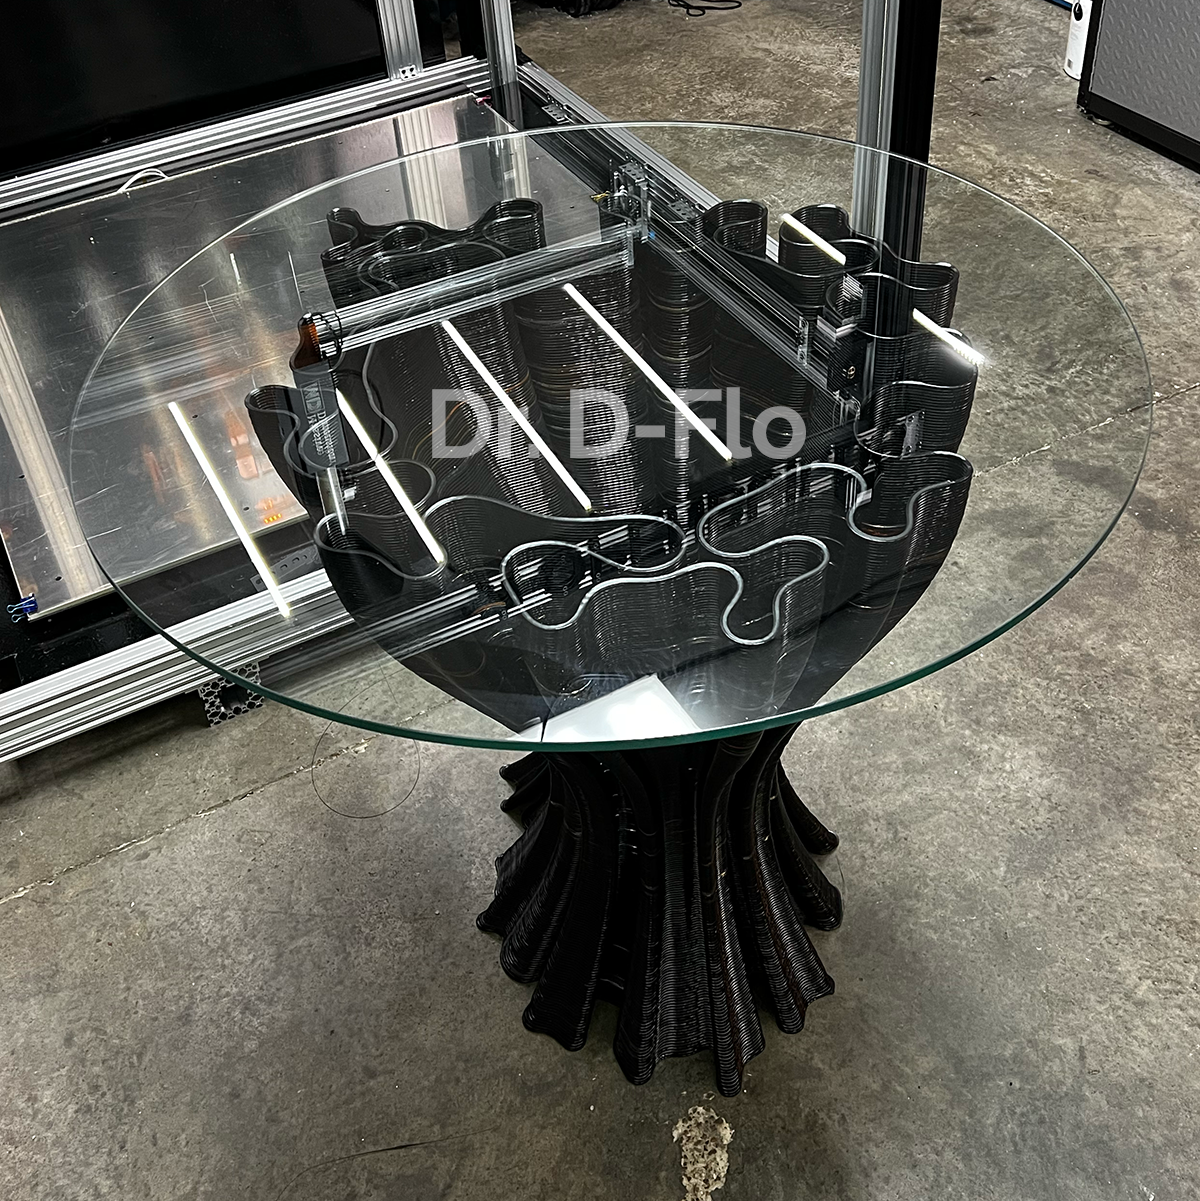 3D Printed table